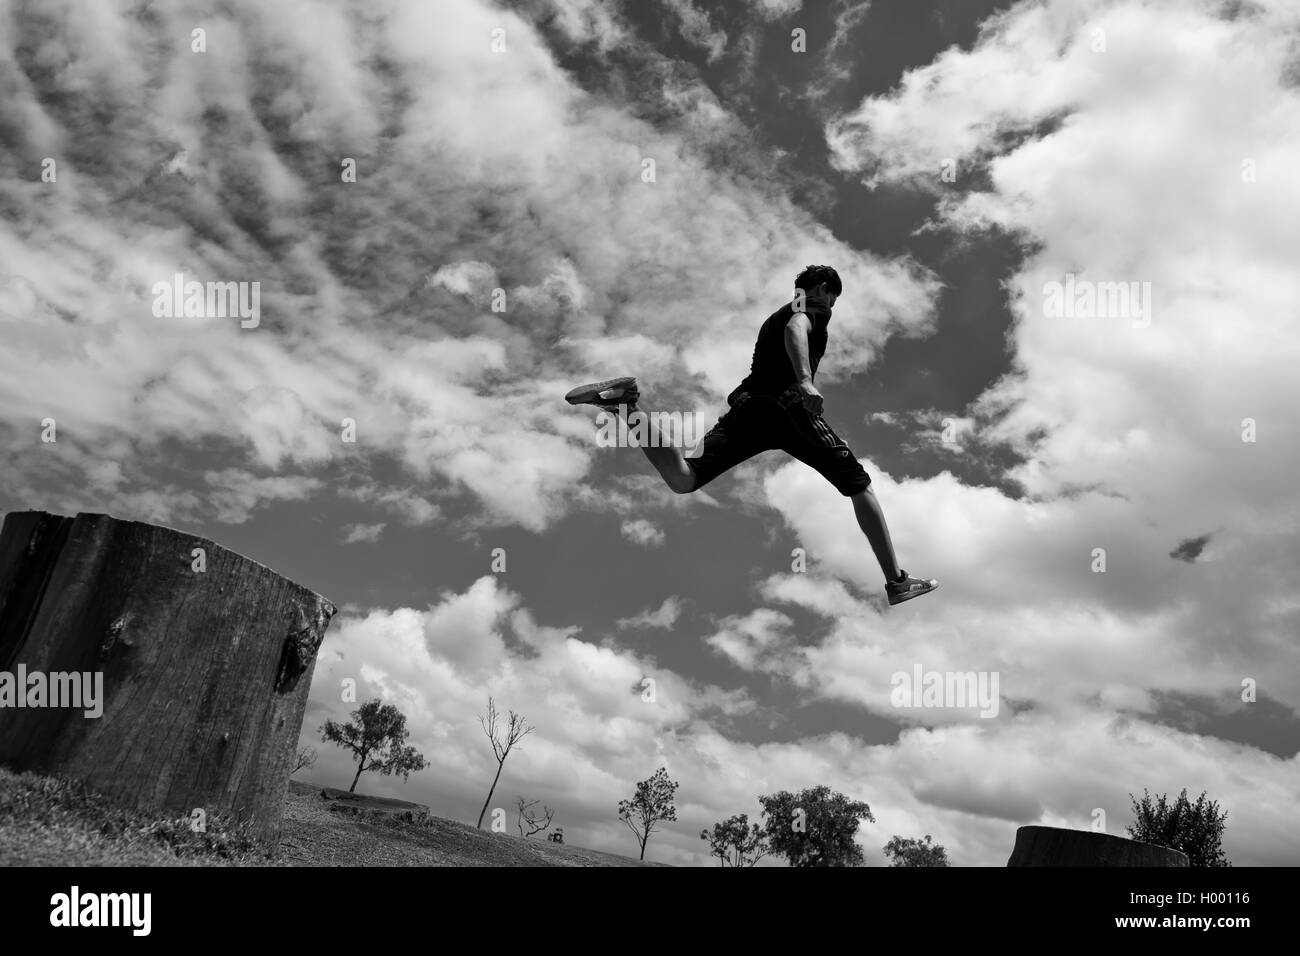 A Colombian parkour runner performs a high jump during a free running training exercise of Tamashikaze team in Bogotá, Colombia. Stock Photo